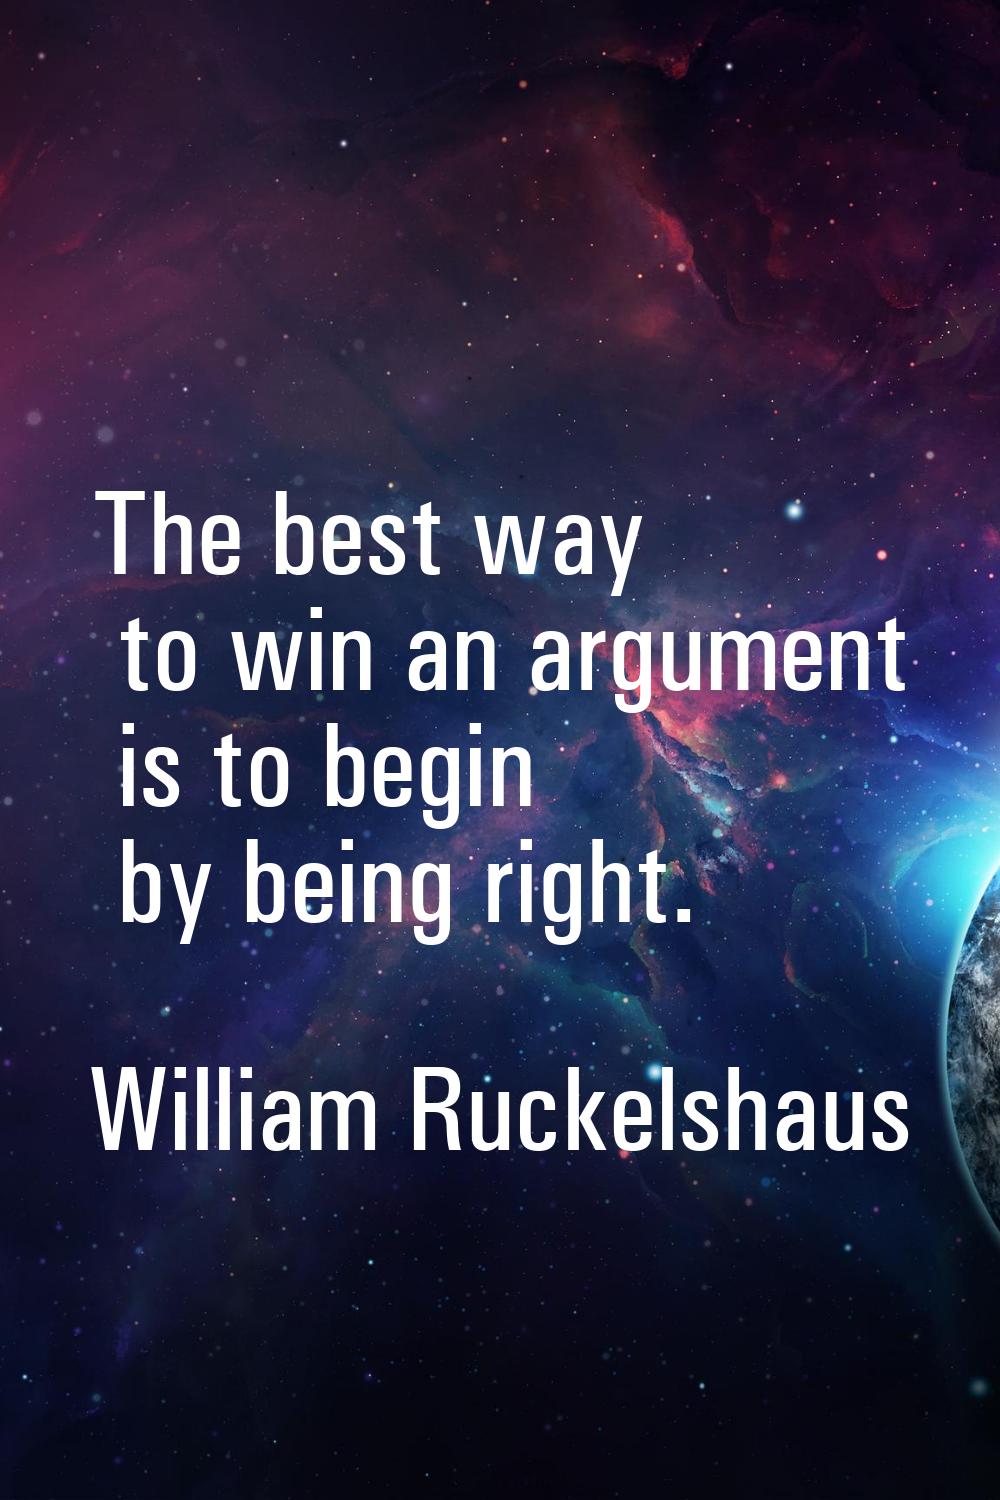 The best way to win an argument is to begin by being right.